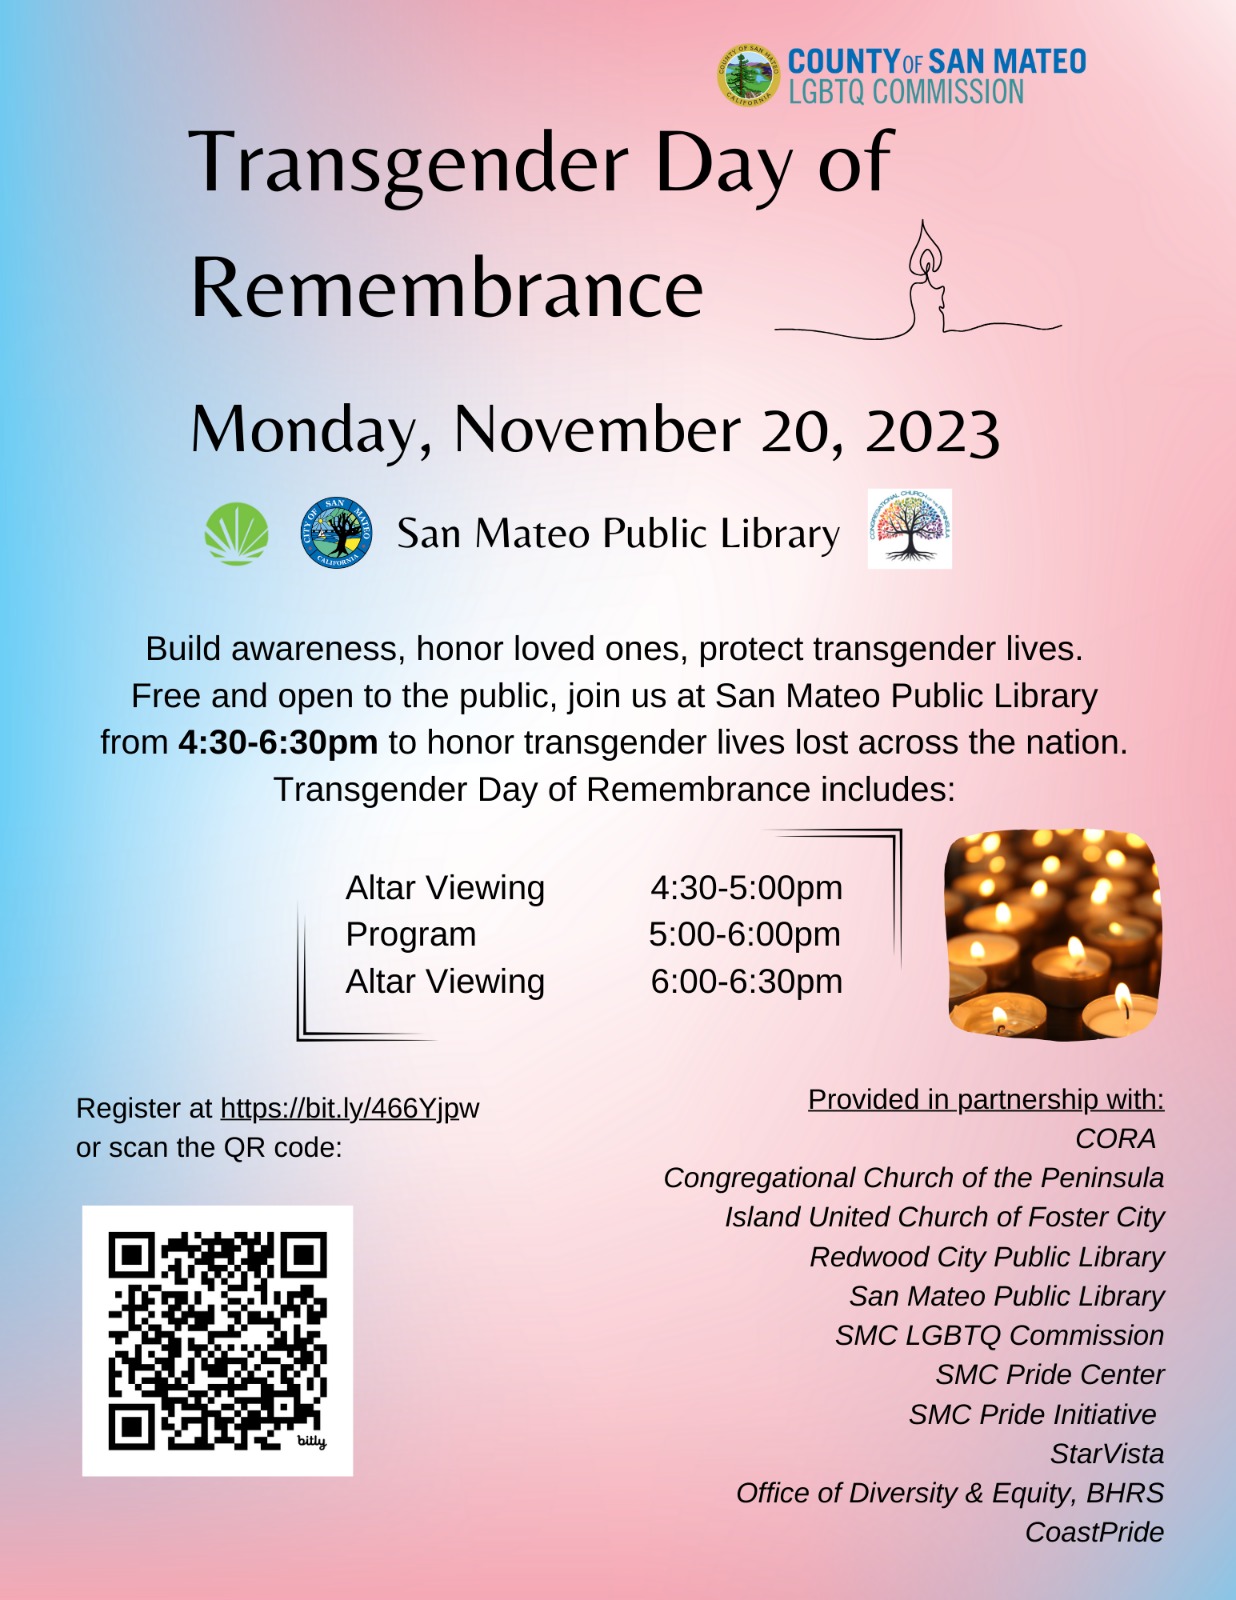 Transgender People's Remembrance Day